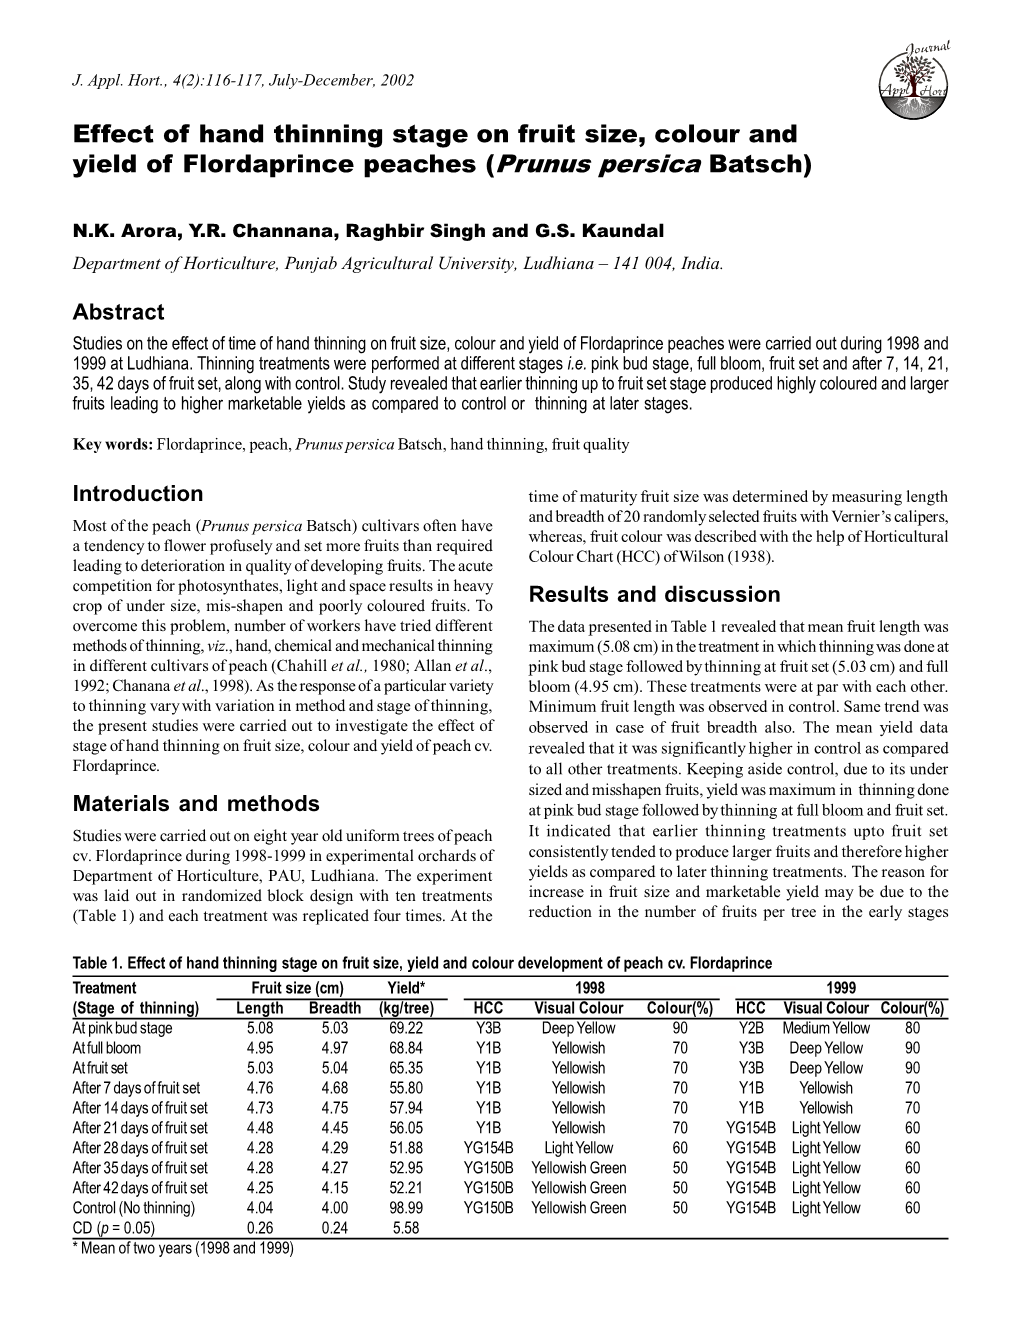 Effect of Hand Thinning Stage on Fruit Size, Colour and Yield of Flordaprince Peaches (Prunus Persica Batsch)